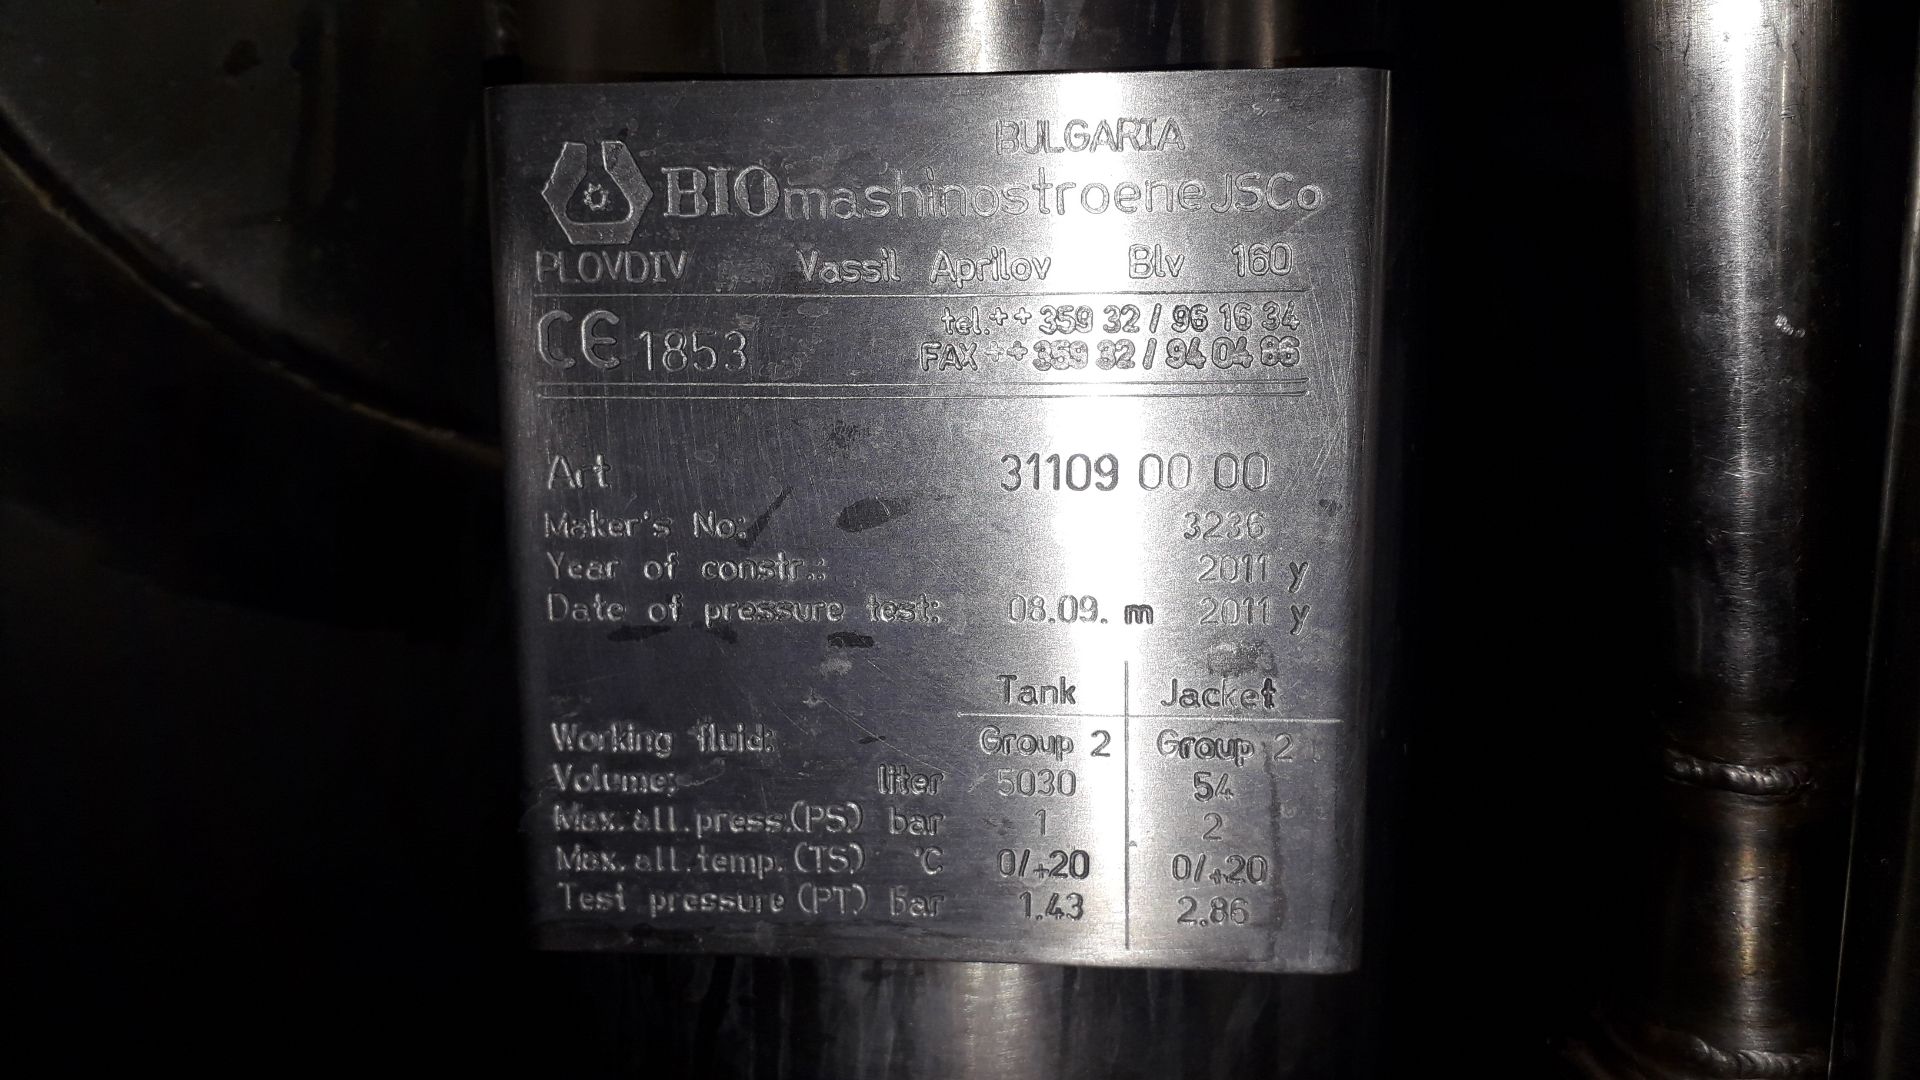 Bio Mashinostroene JSO 5,030Ltr Fermentation Vessel (2011) Serial Number 3236 - Viewing strongly - Image 4 of 4